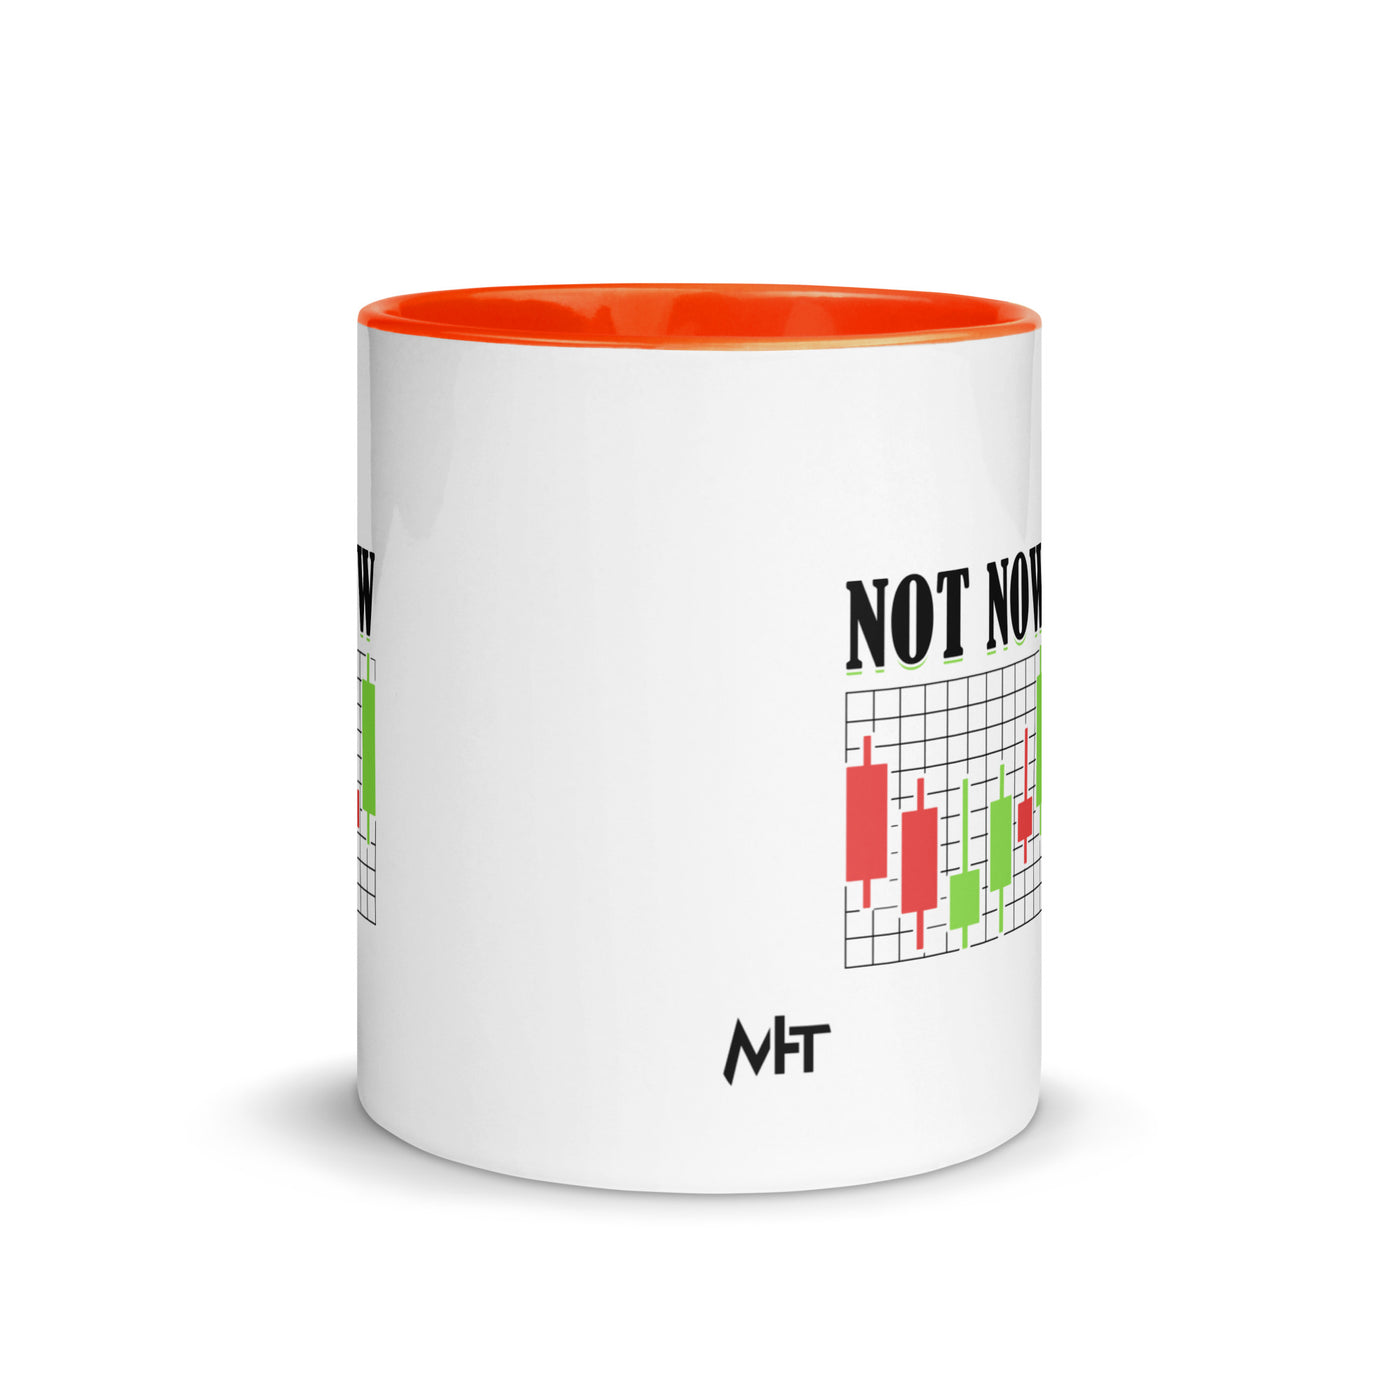 Not Now in Dark Text - Mug with Color Inside